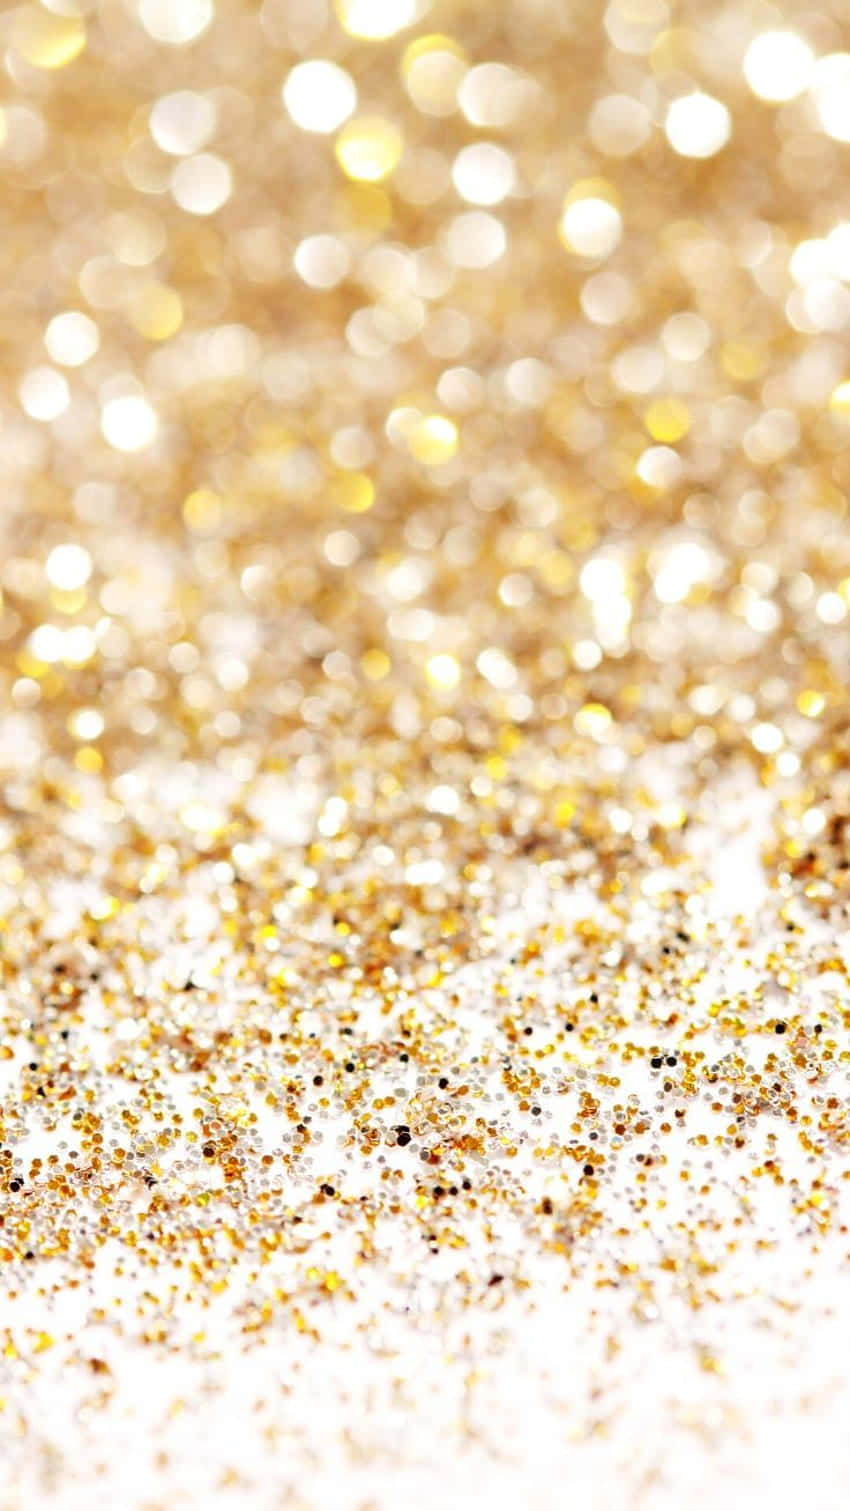 A Close Up Of Gold Glitter On A White Background Wallpaper